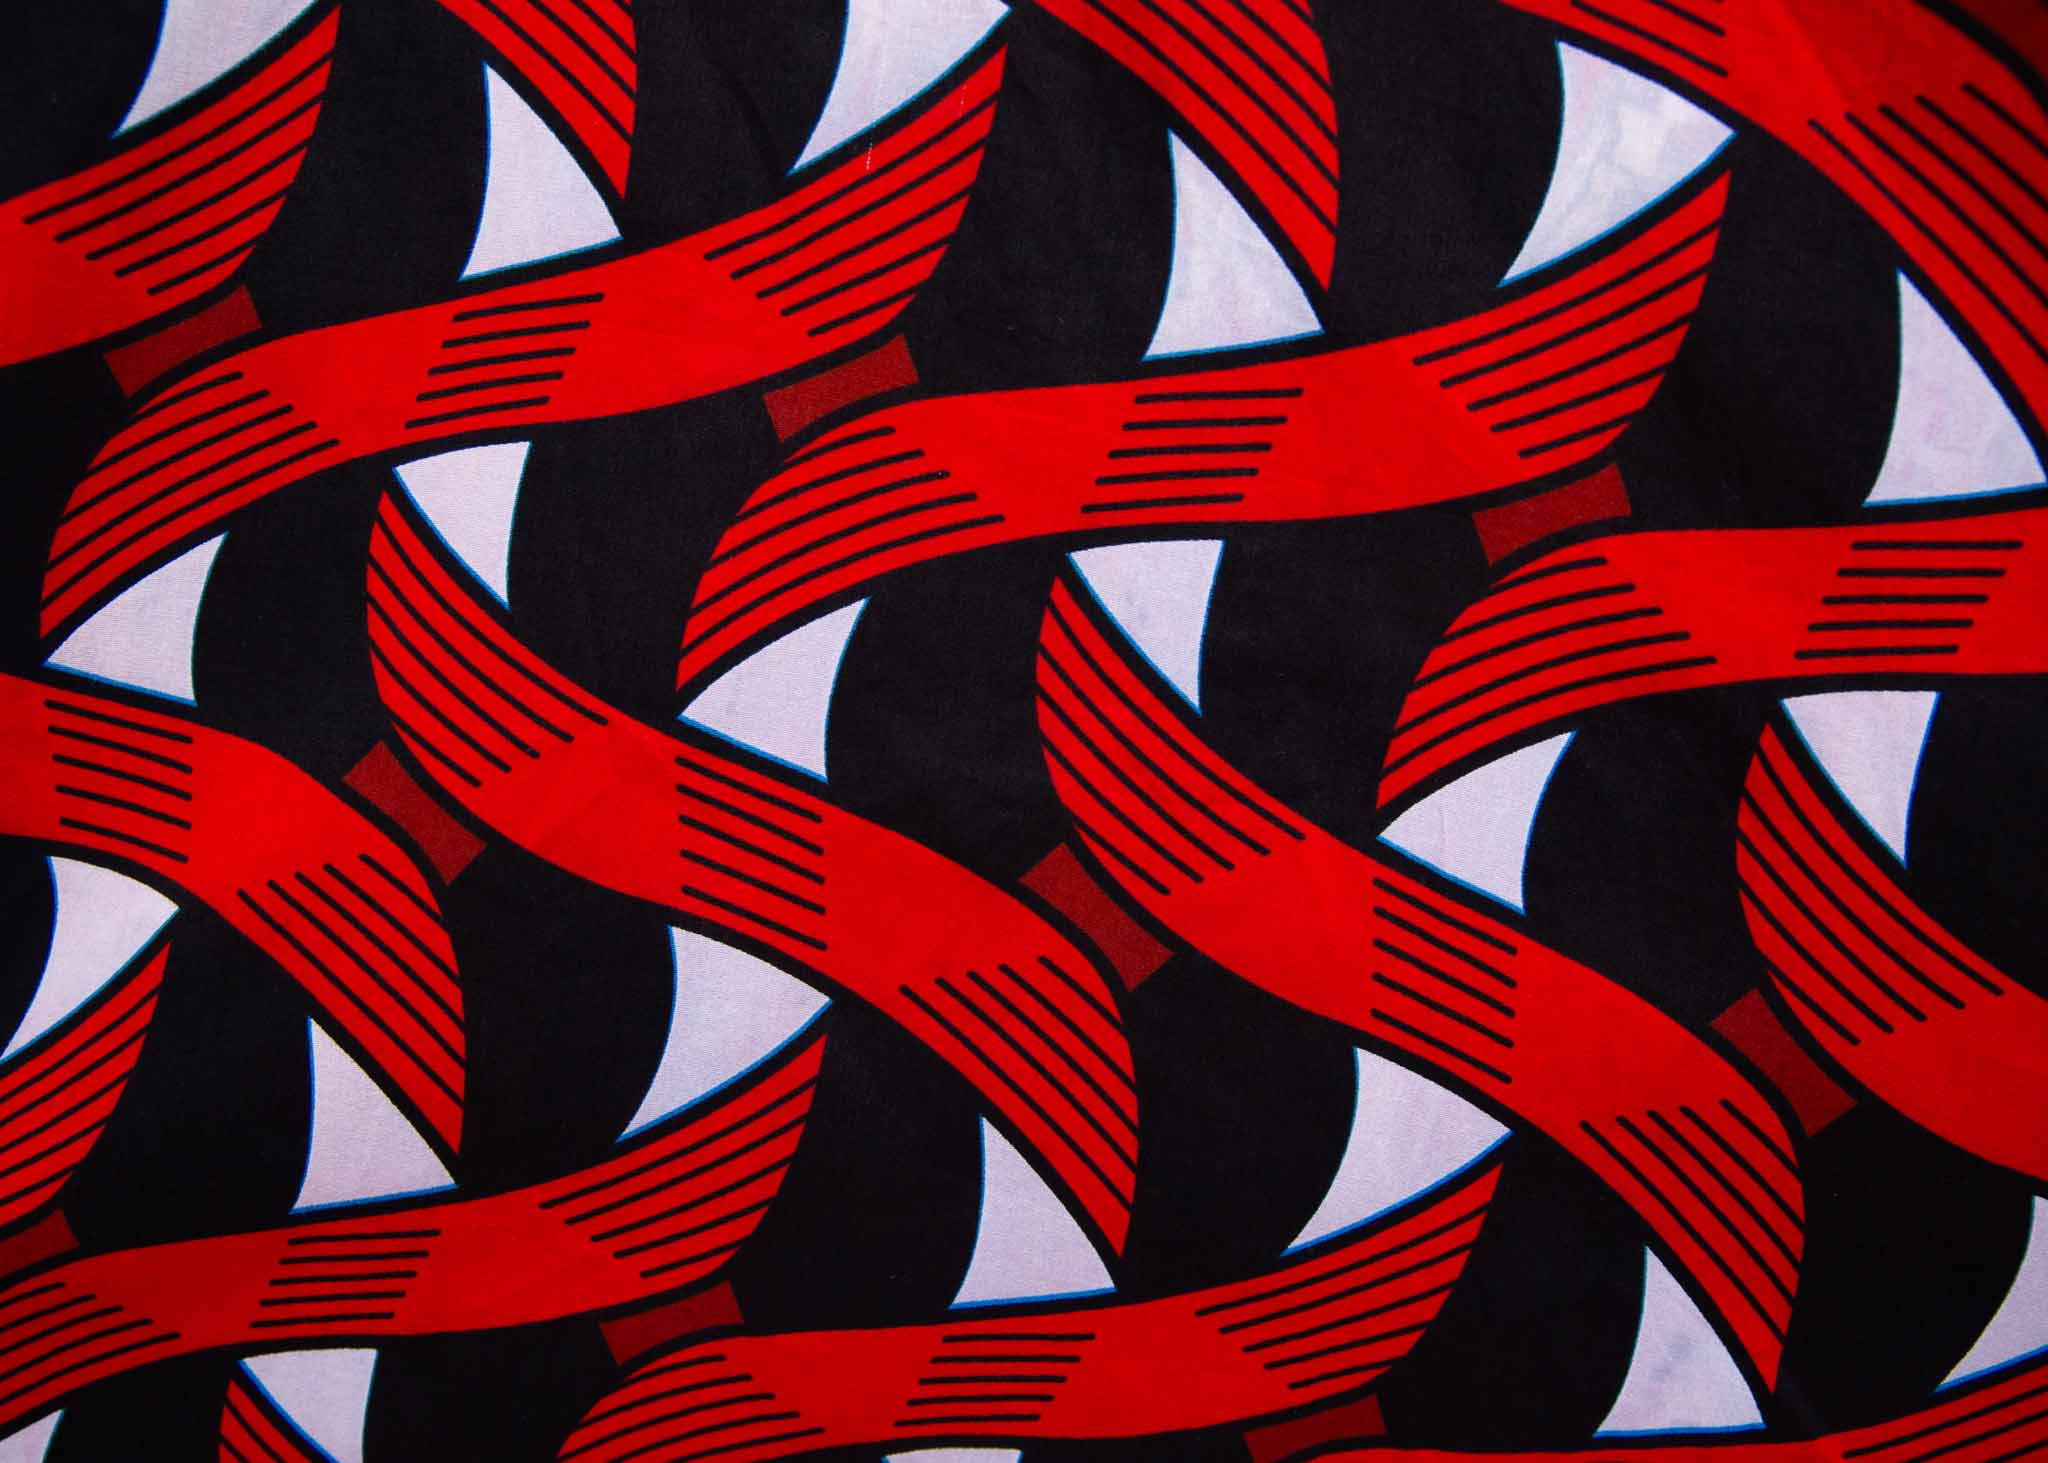 Display of red, black and white ribbon print dress, fabric.